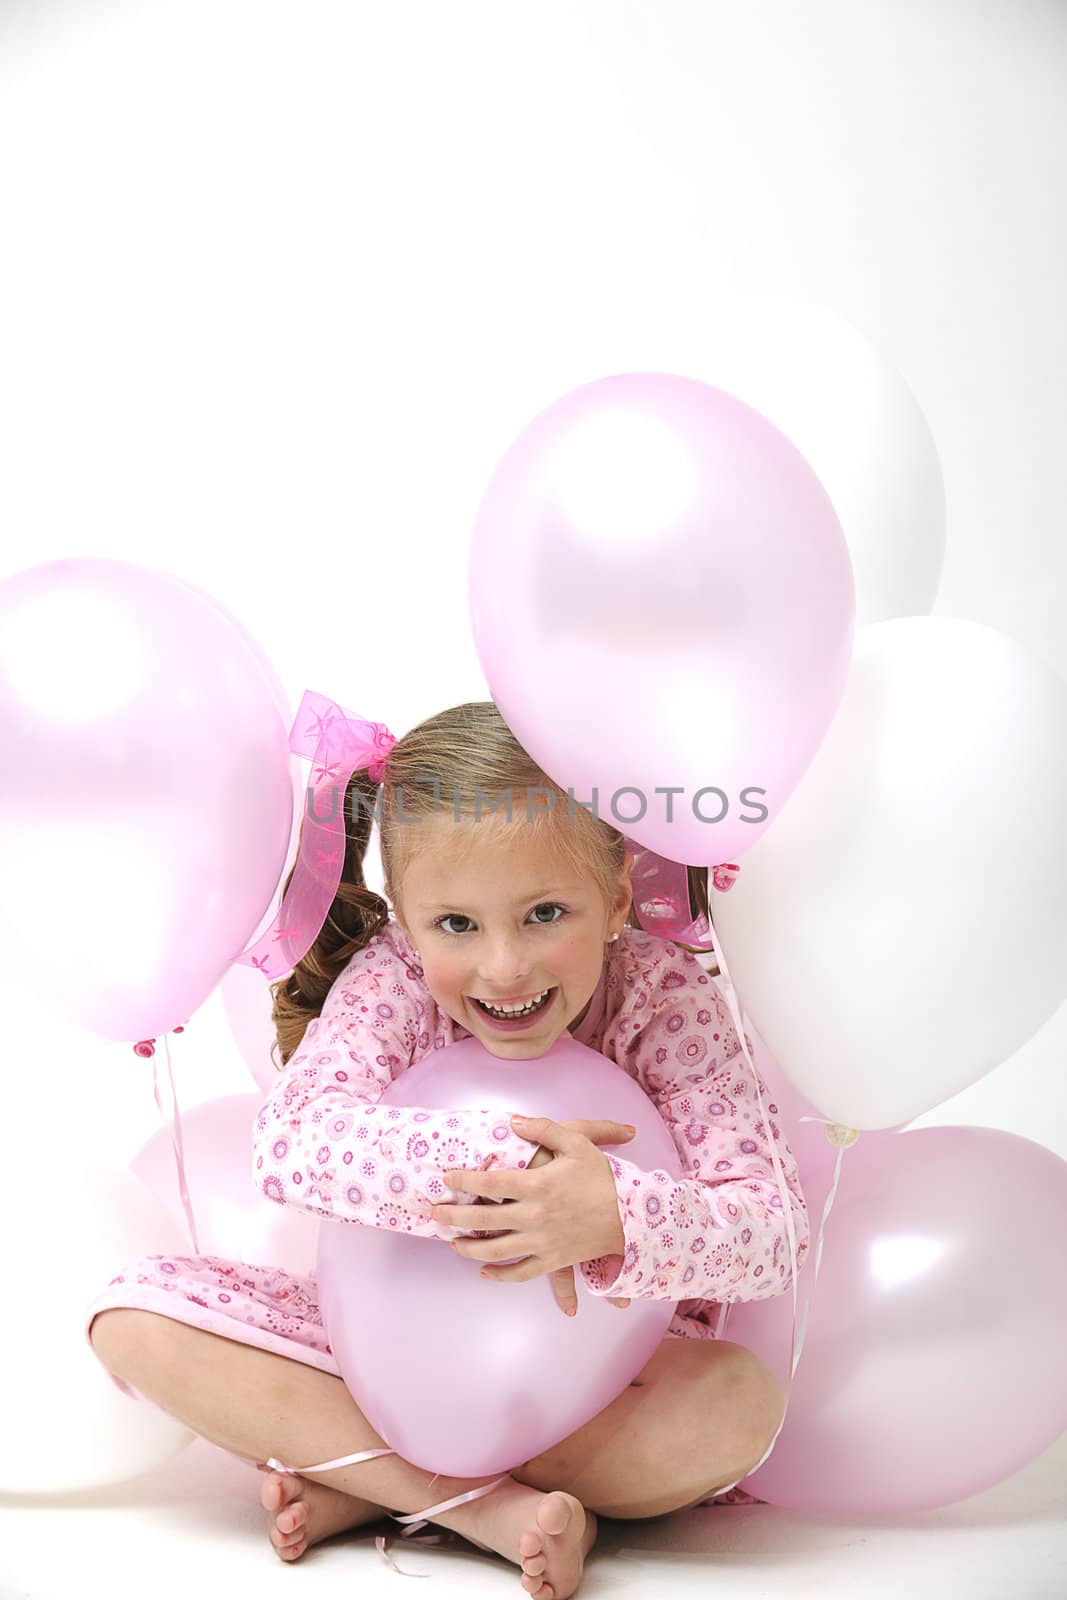 a pretty young blond girl sitting between pink and white balloons